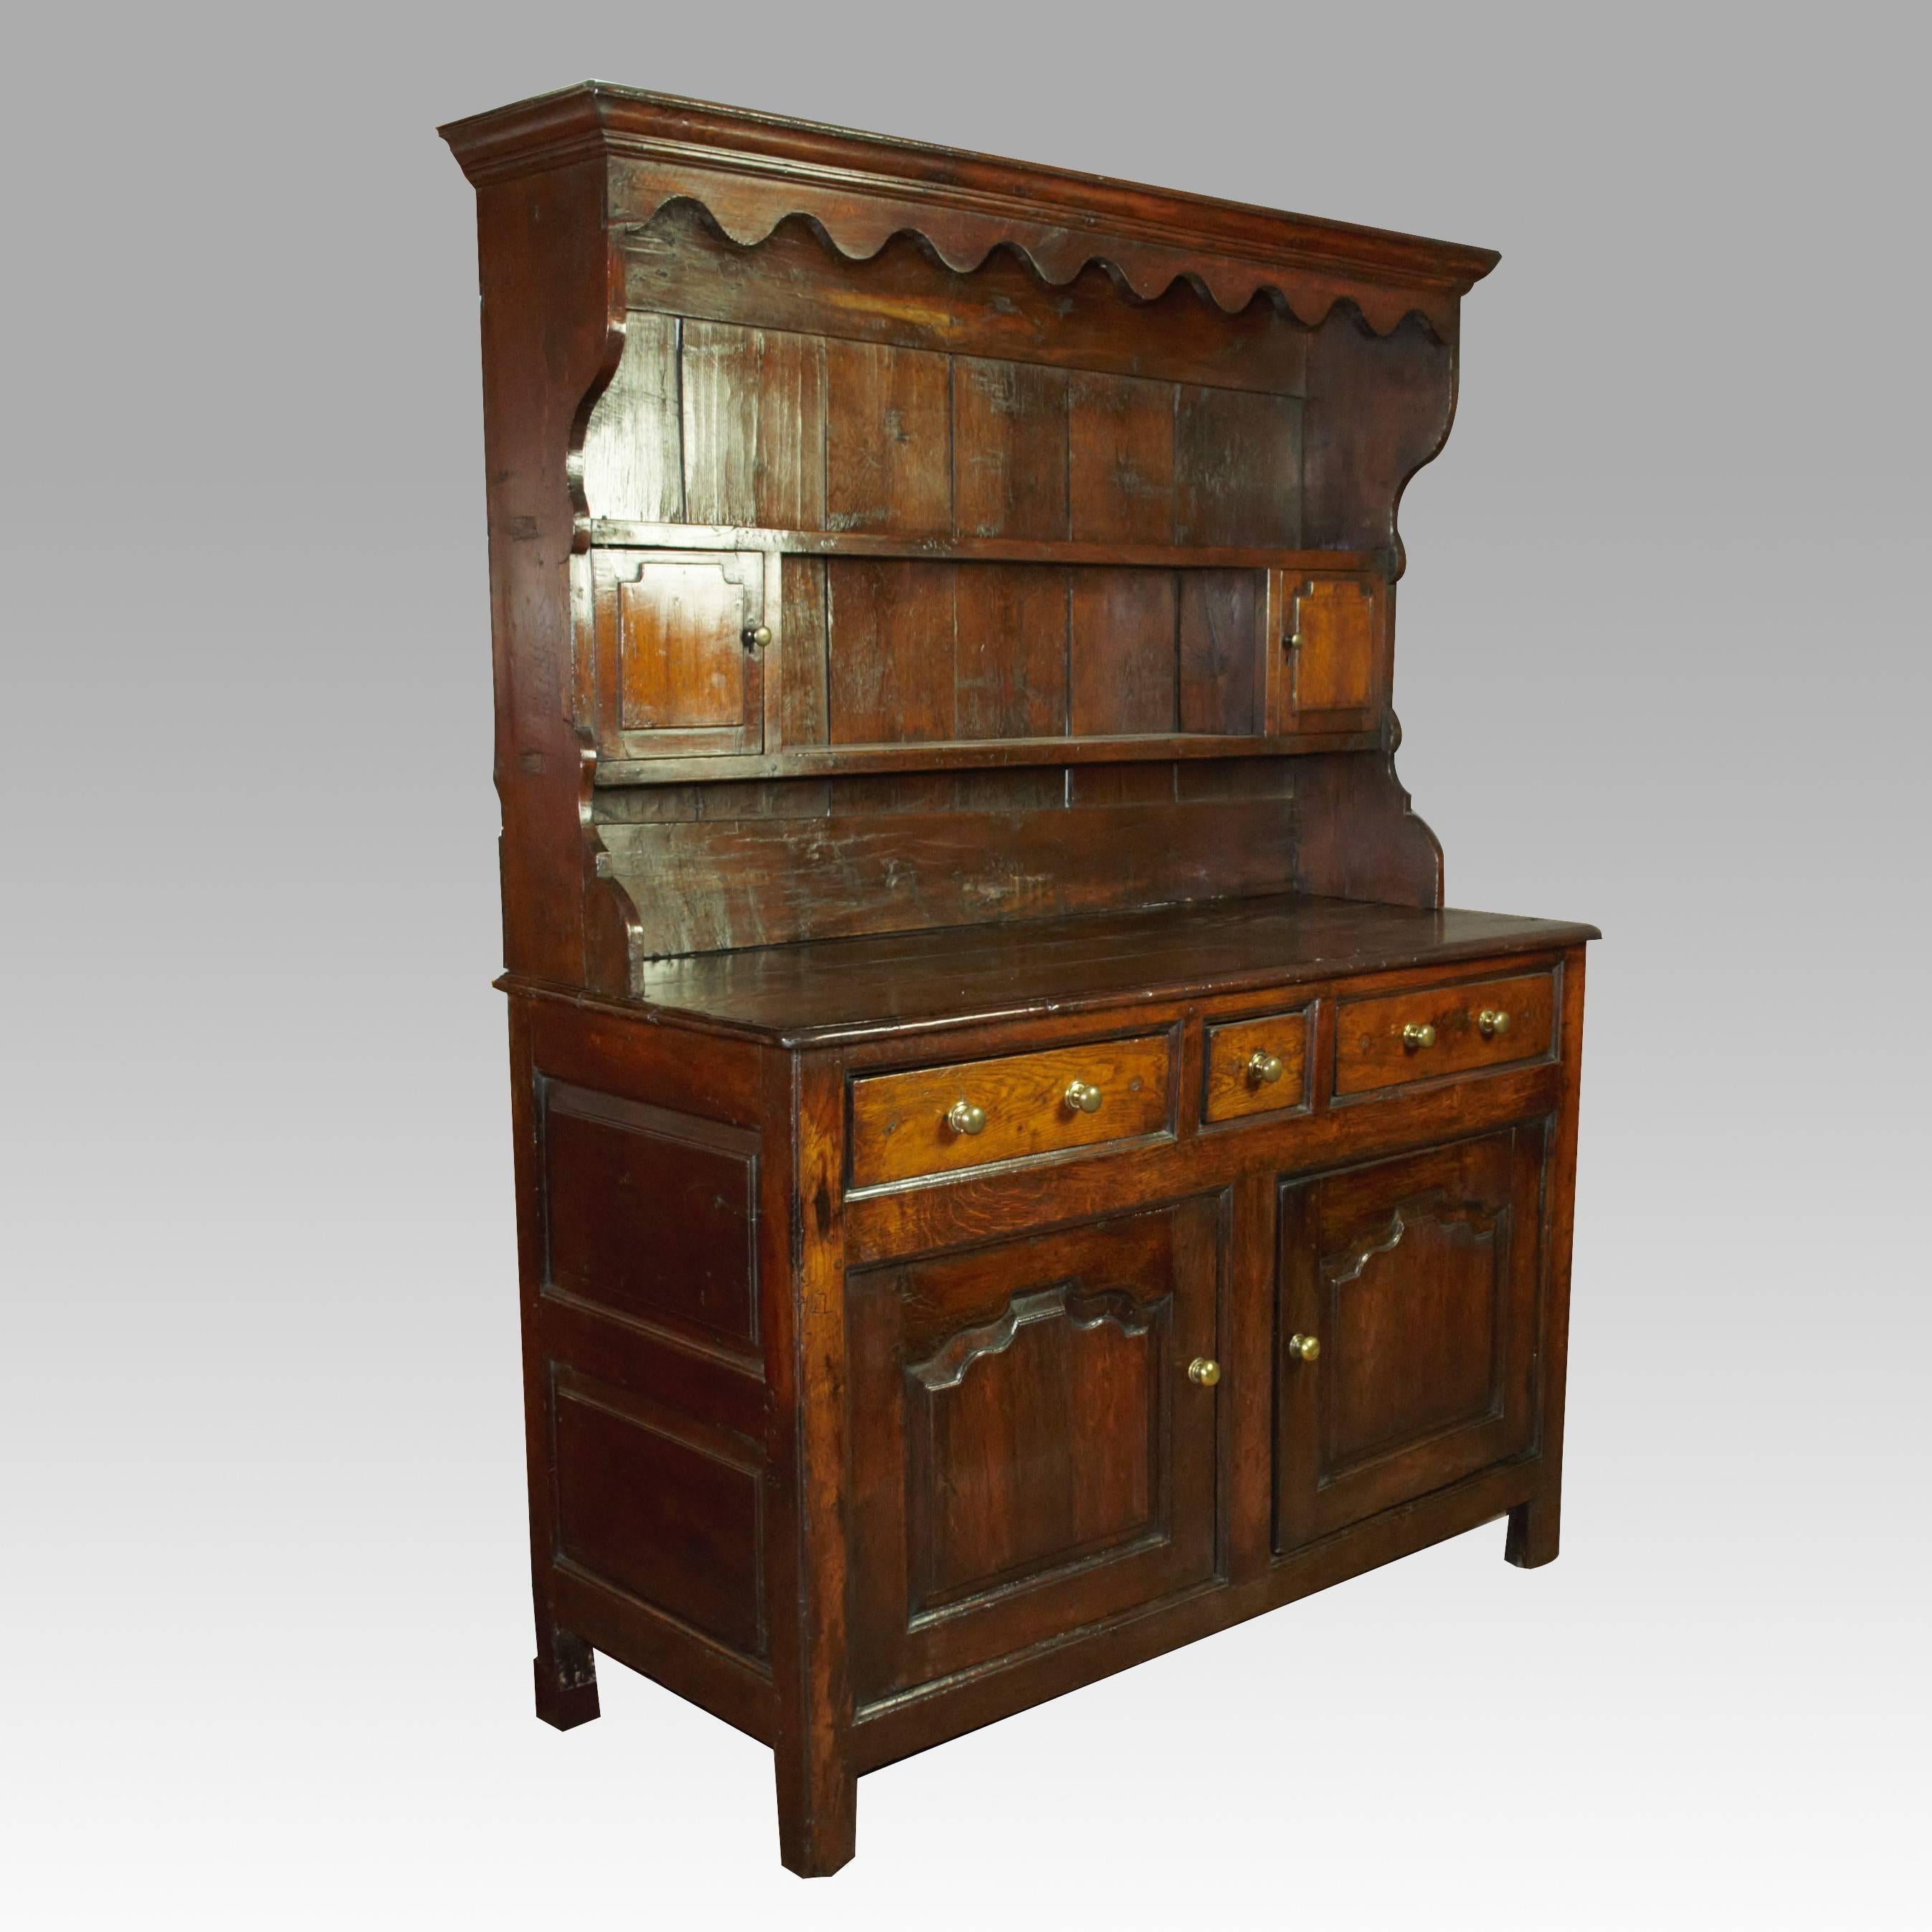 A fine quality Carmarthenshire, 18th century oak dresser and rack of small size and excellent color. The wavy-edge canopy above plate racks and two small cupboards, raised on a panelled two-door cupboard base with three drawers and standing on stile